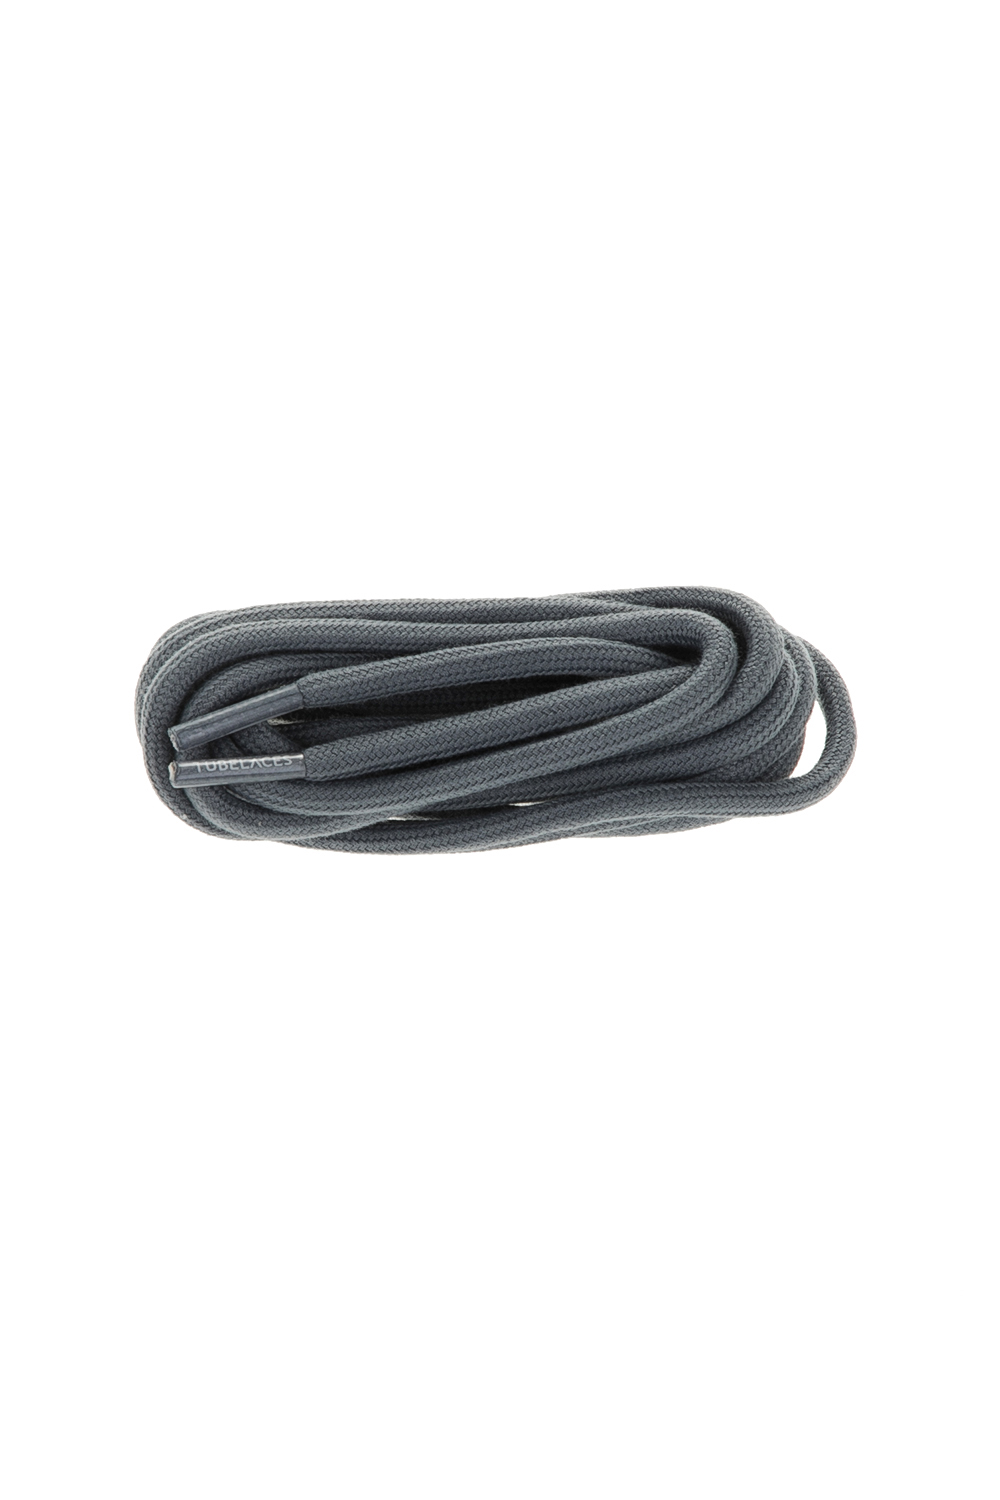 TUBELACES – Unisex TUBELACES ROPE SOLID γκρι 1670428.0-00G4